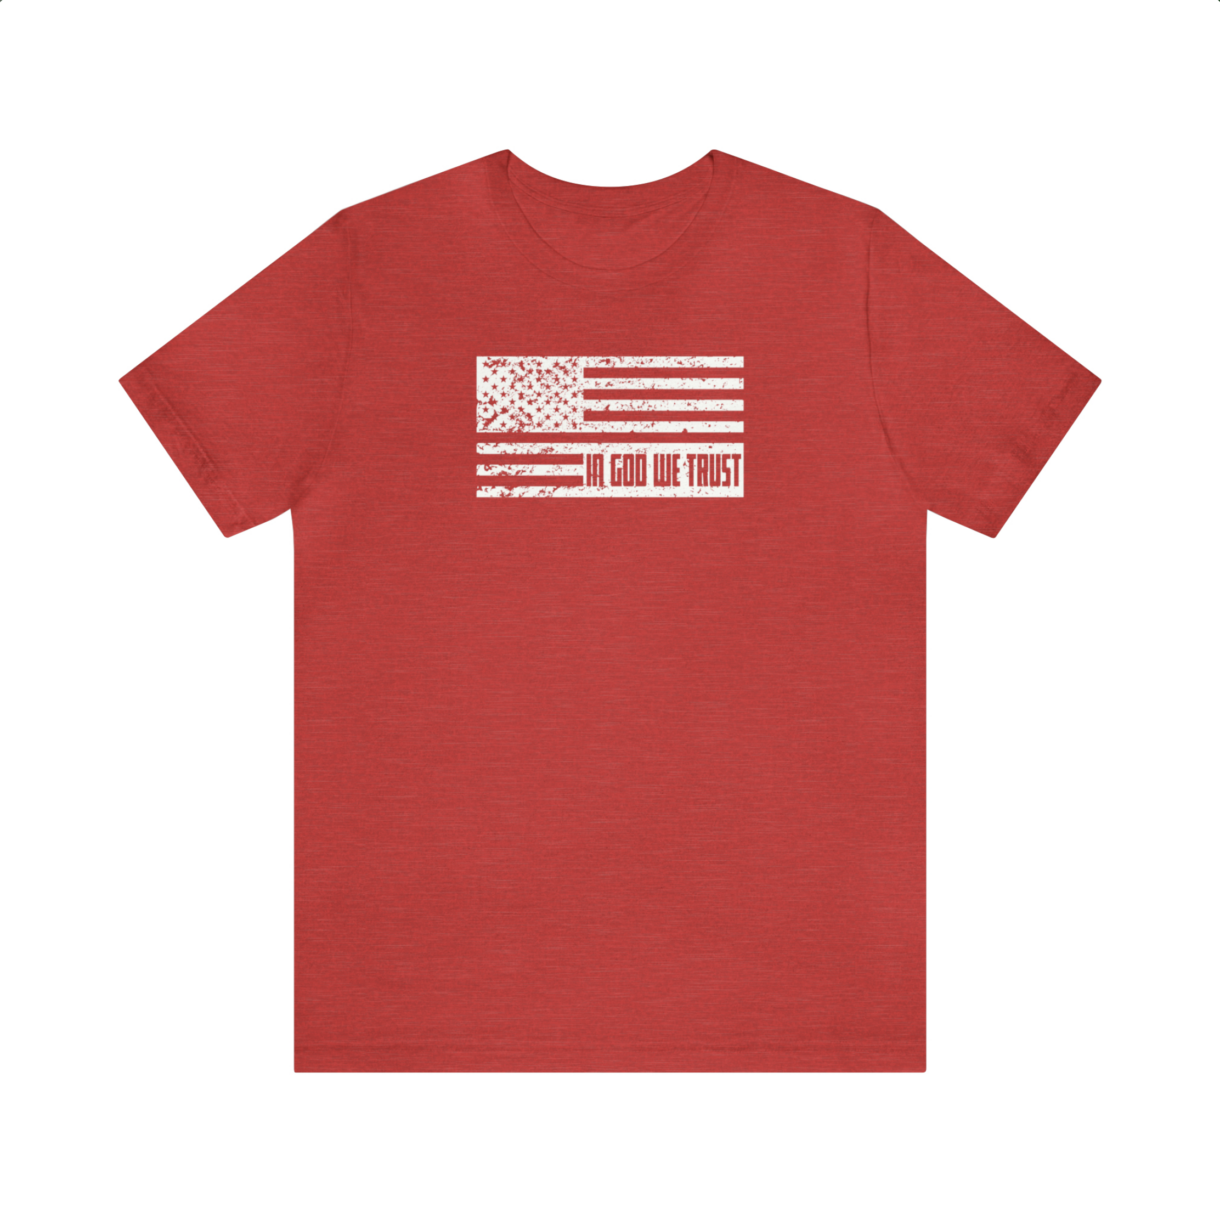 adult red t shirt with flag in god we trust